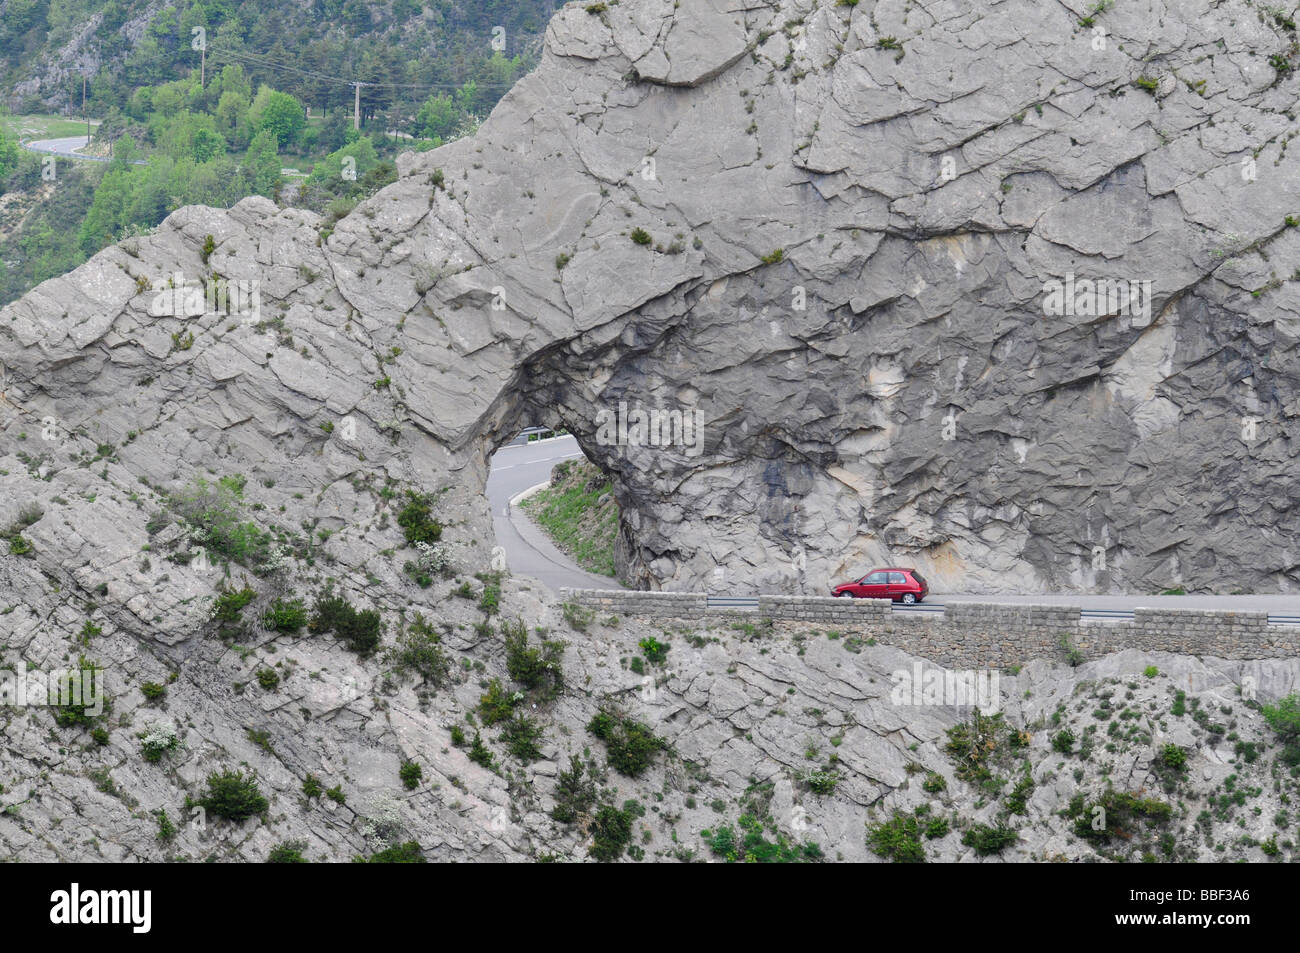 Driving a car on the famous 'route Napoleon', a winding scenic road in a canyon in southern France. Stock Photo